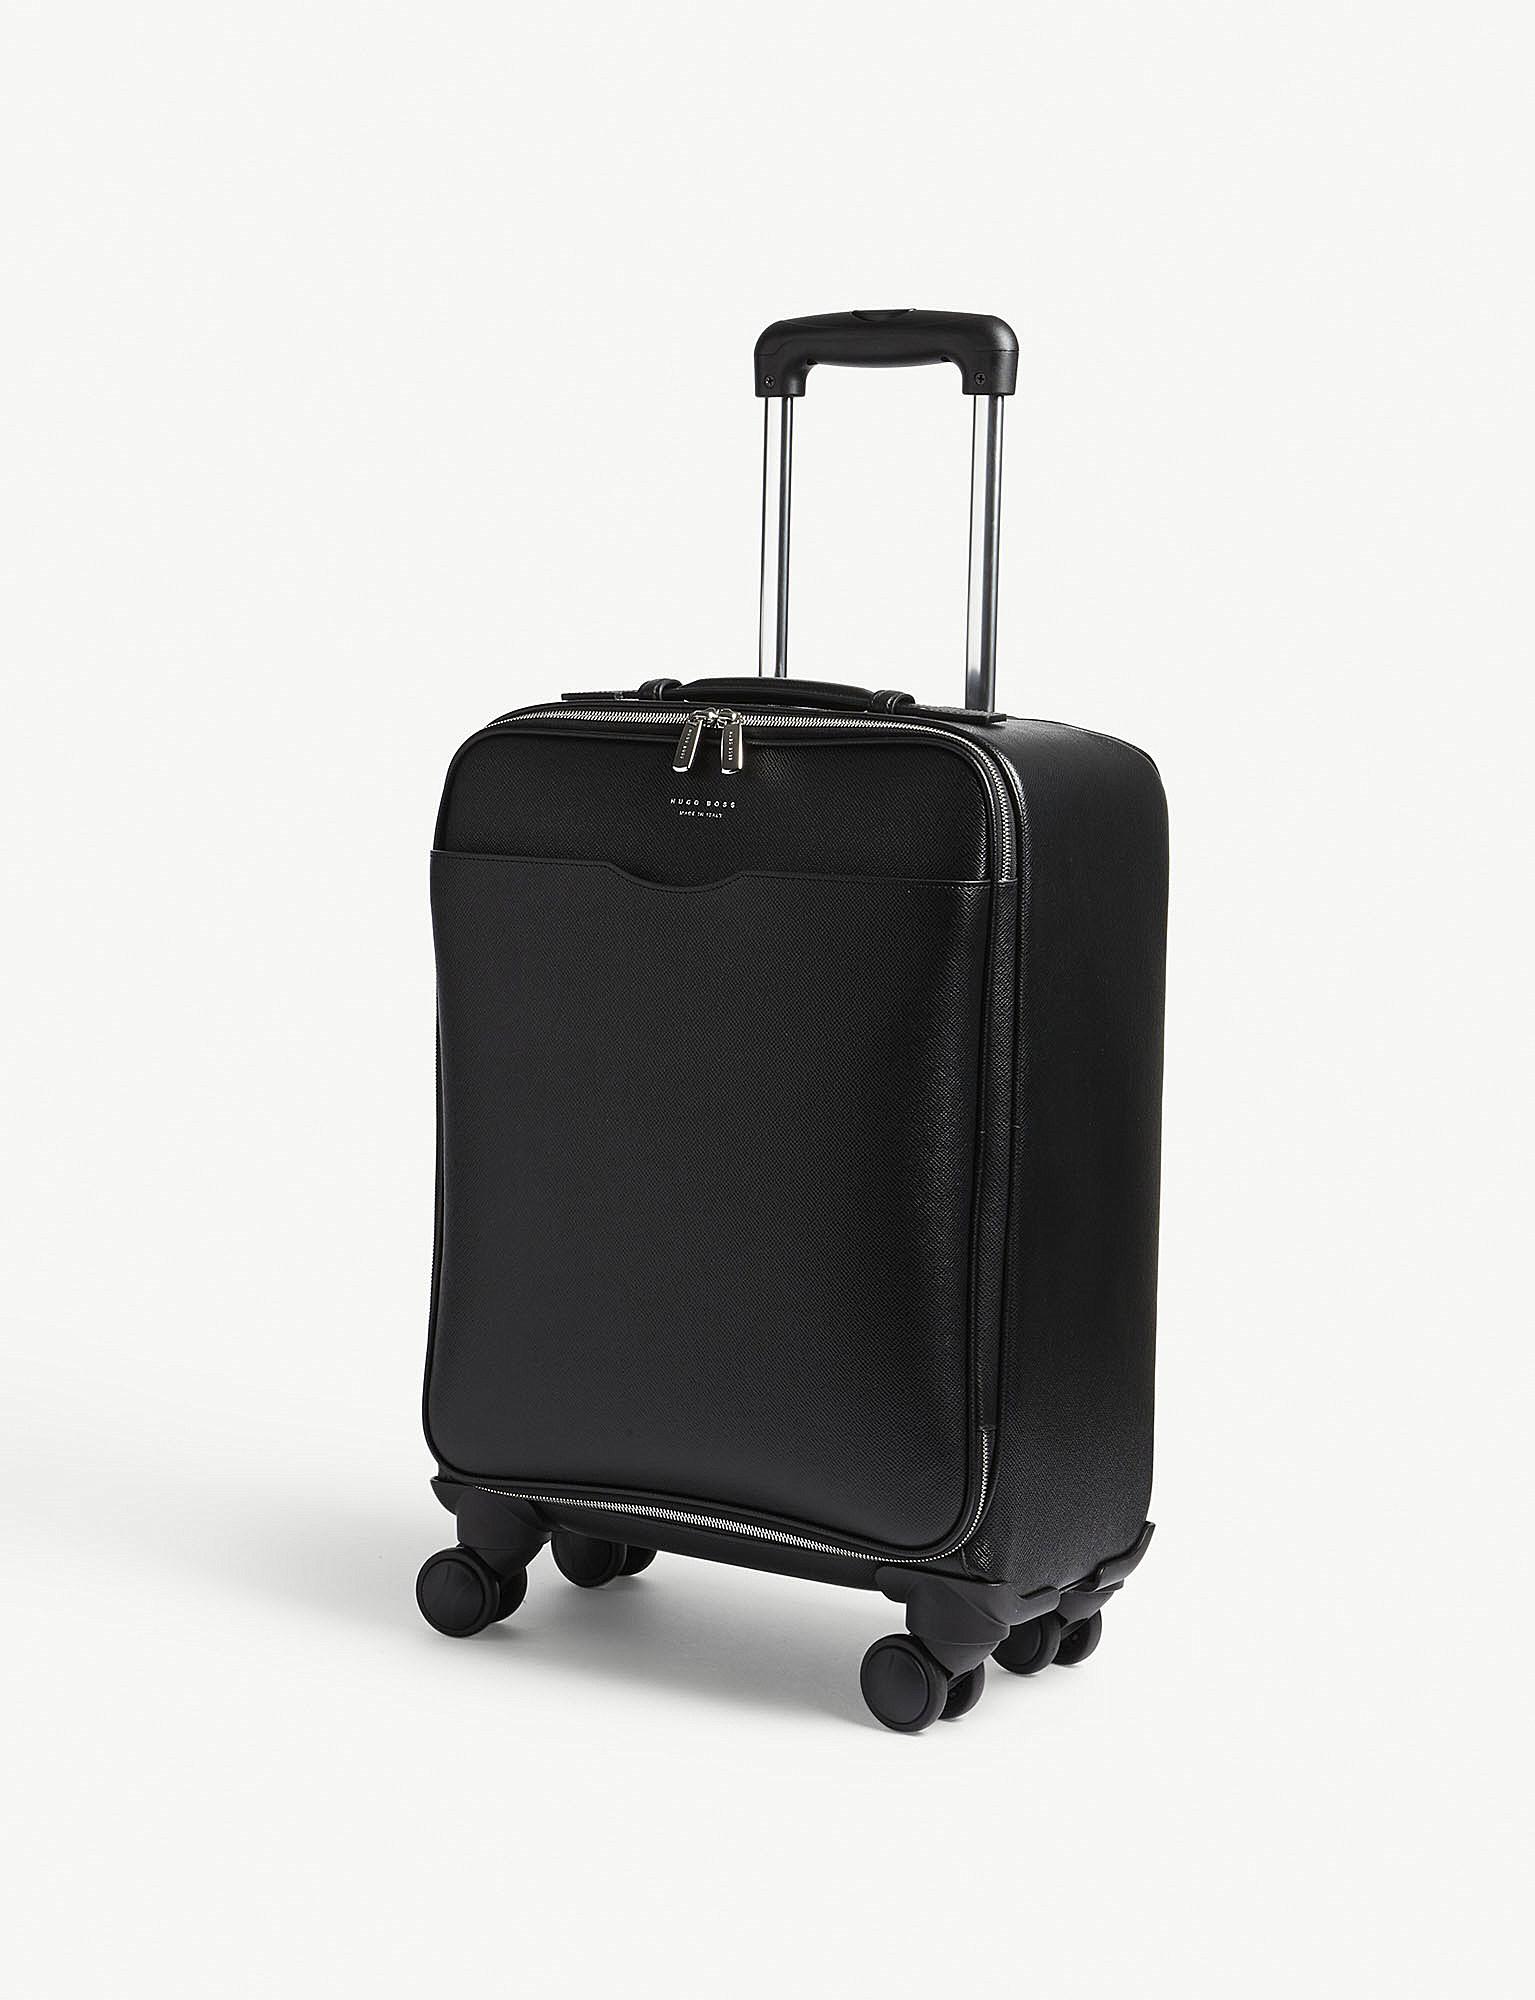 BOSS by HUGO BOSS Signature Trolley Leather Suitcase 52cm in Black for Men